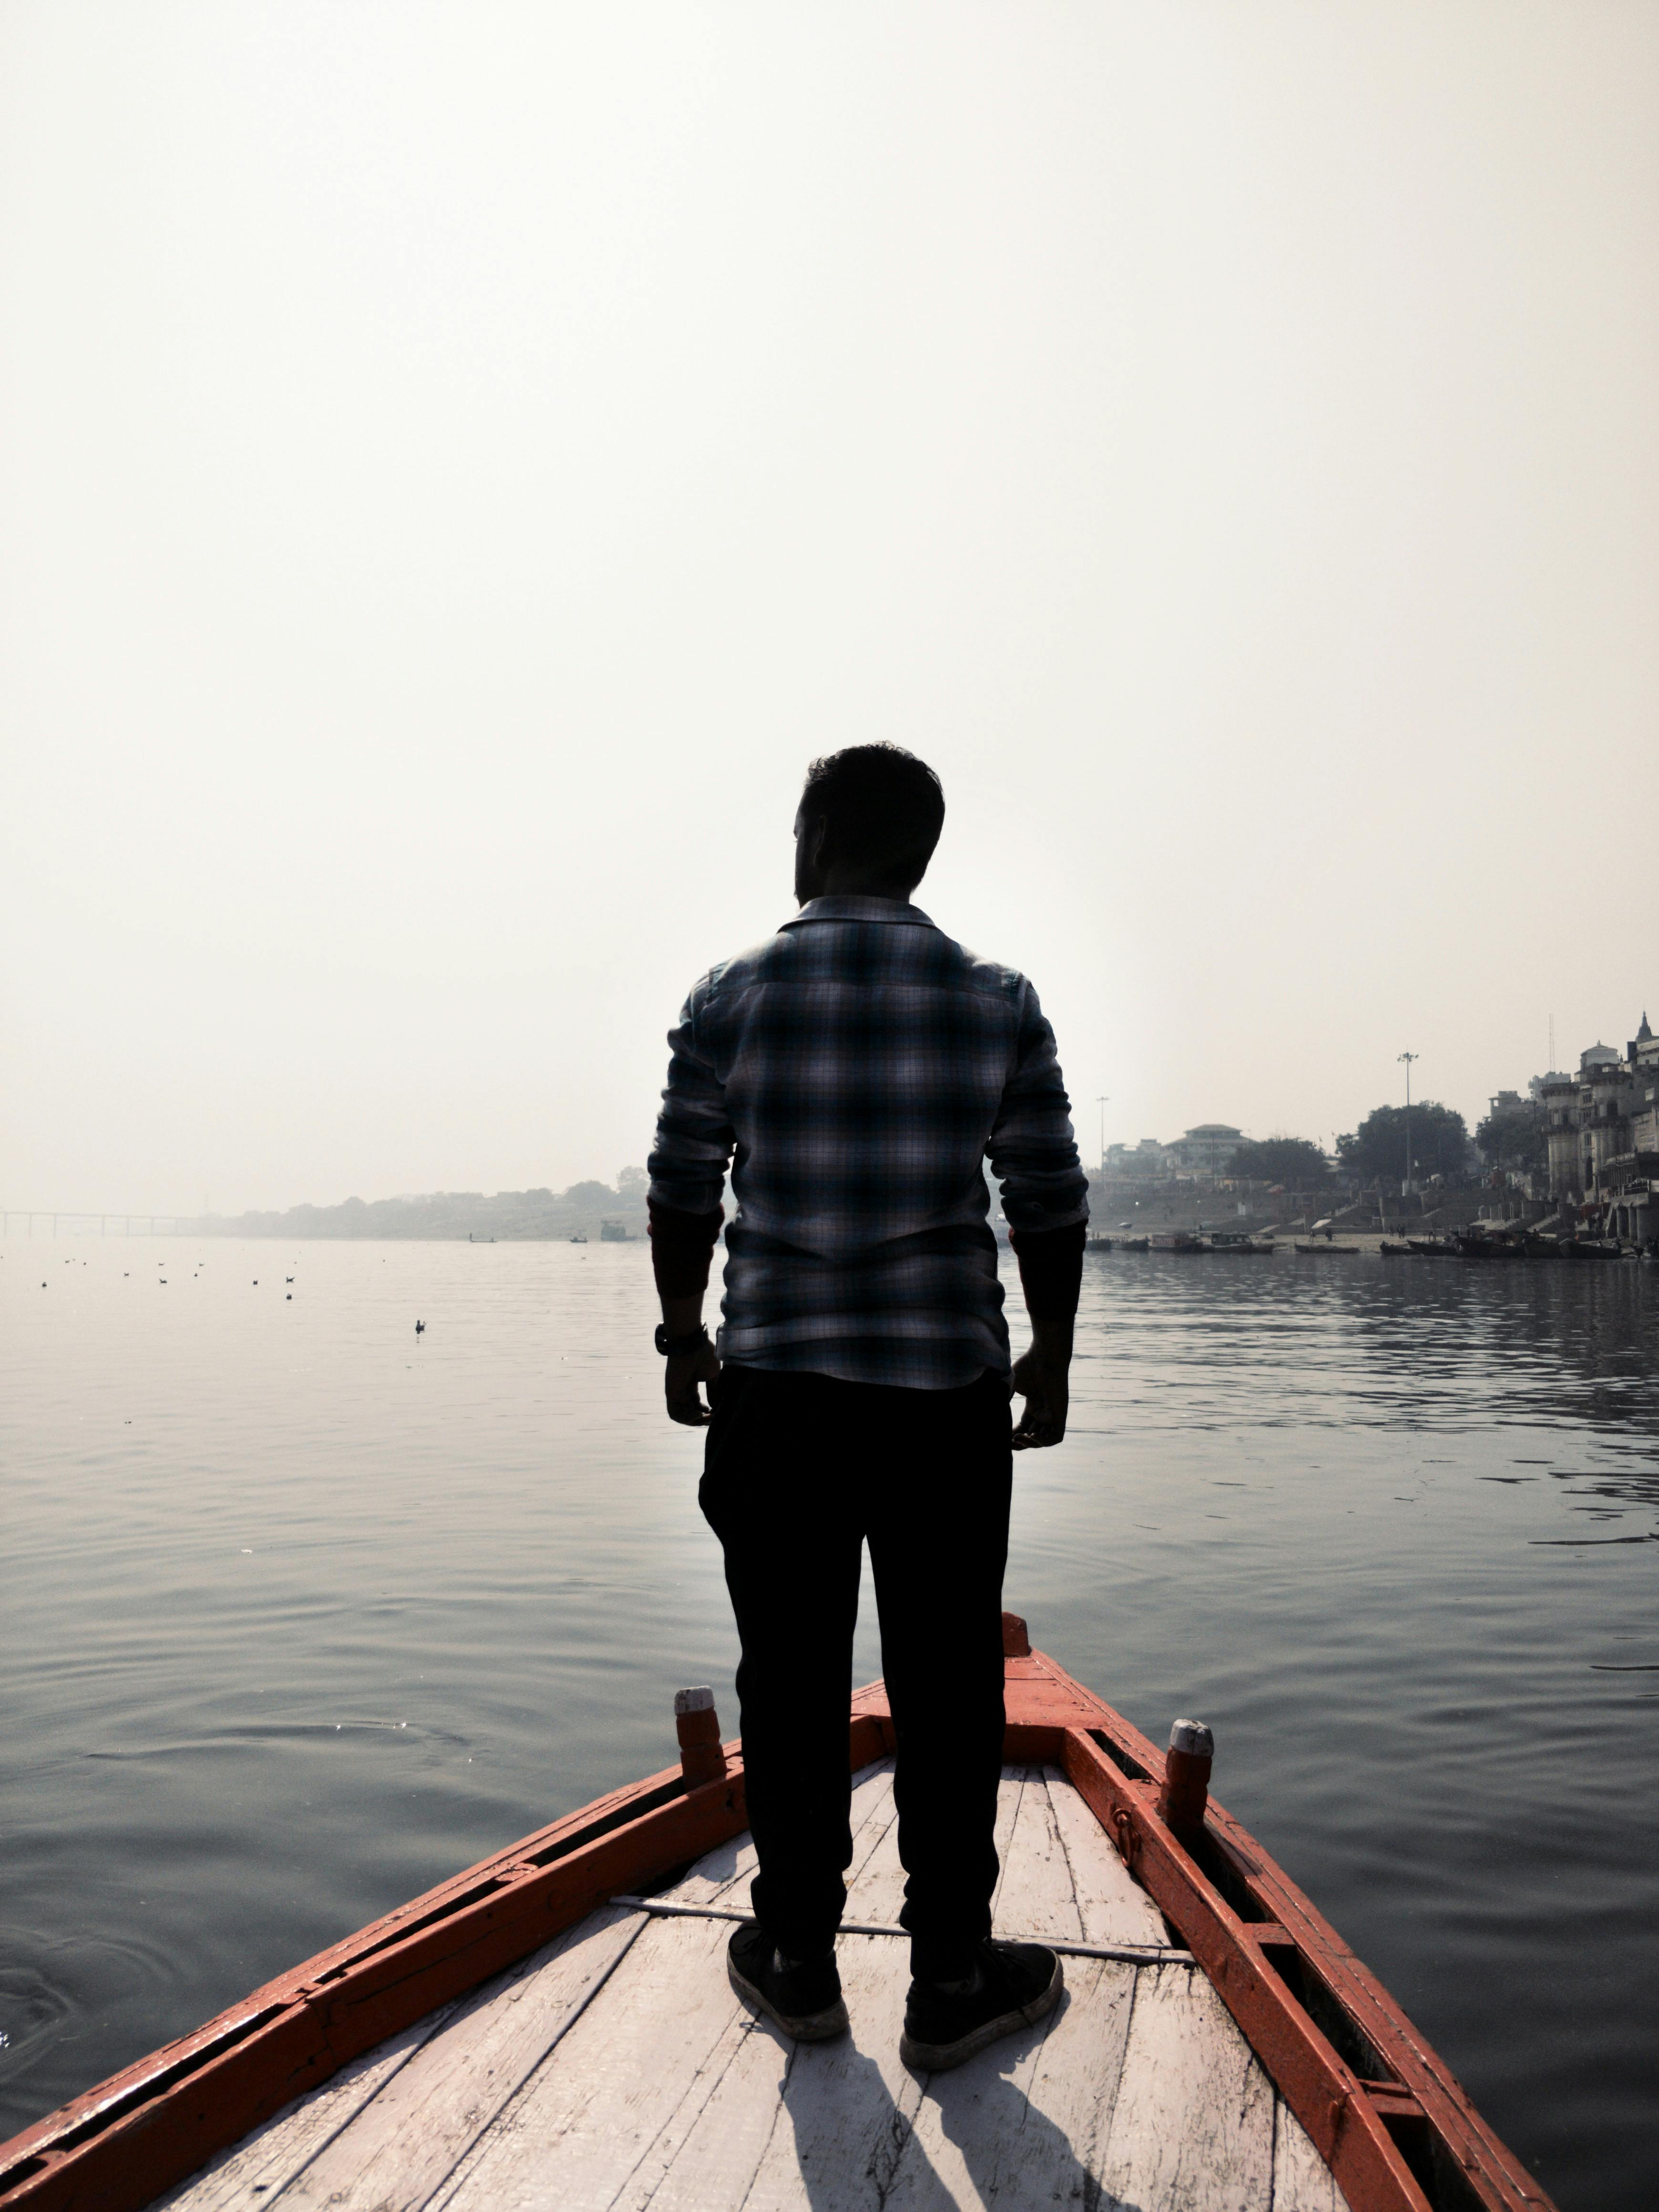 Man standing on a wooden boat. | Photo: Pexels